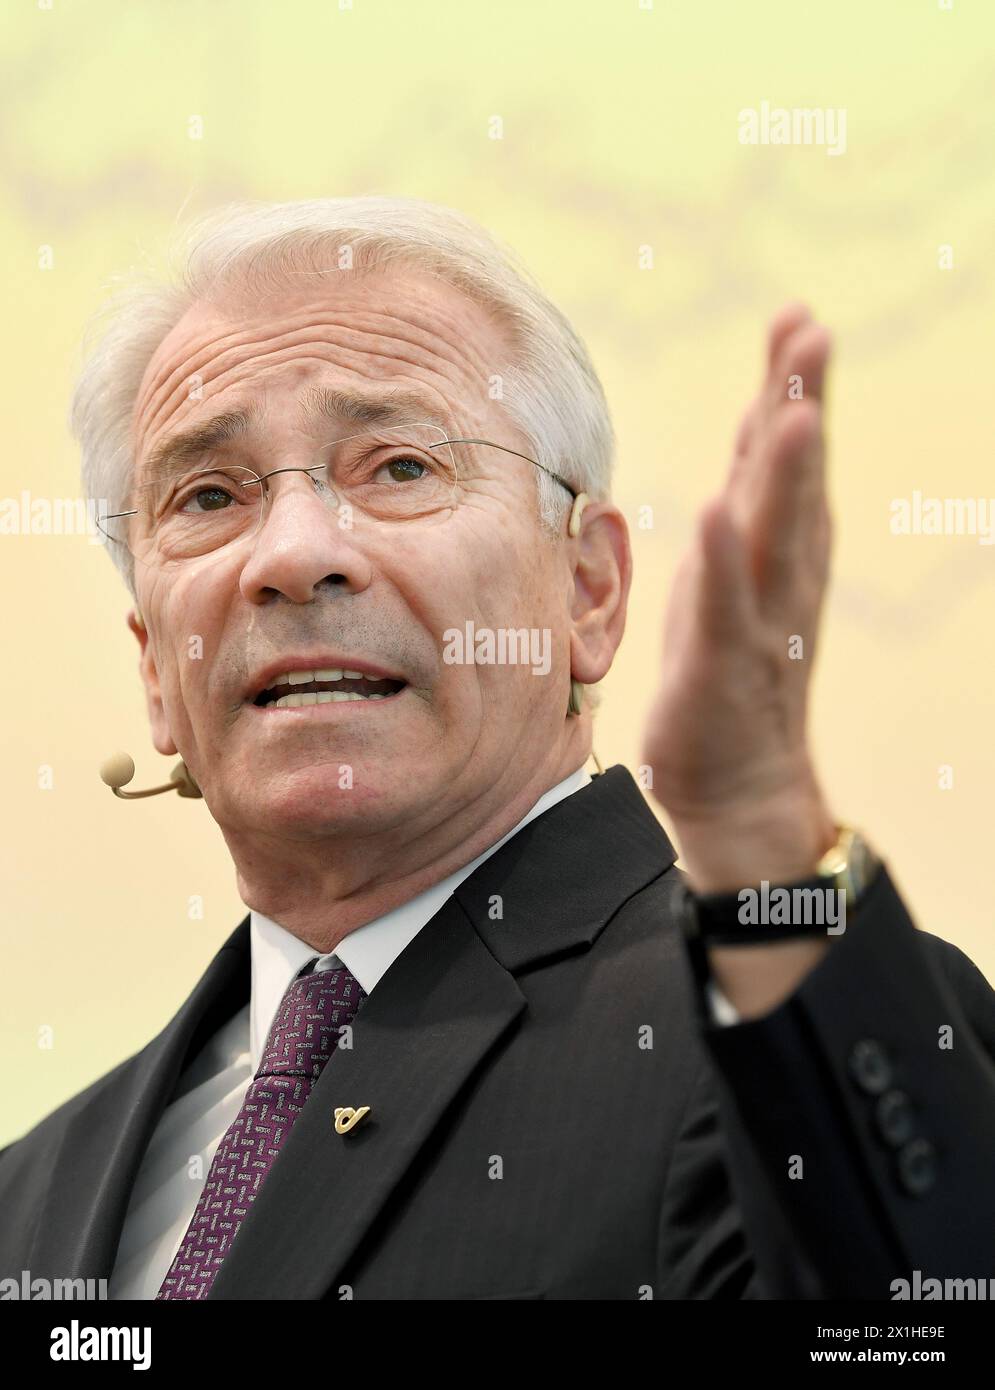 Austrian Post, Austrian postal service - picture taken in Vienna, Austria, on 14 th  March 2019. PICTURE:  Georg Pölzl, Chairman of the Board, Chief Executive Officer (CEO) - 20190314_PD1080 - Rechteinfo: Rights Managed (RM) Stock Photo